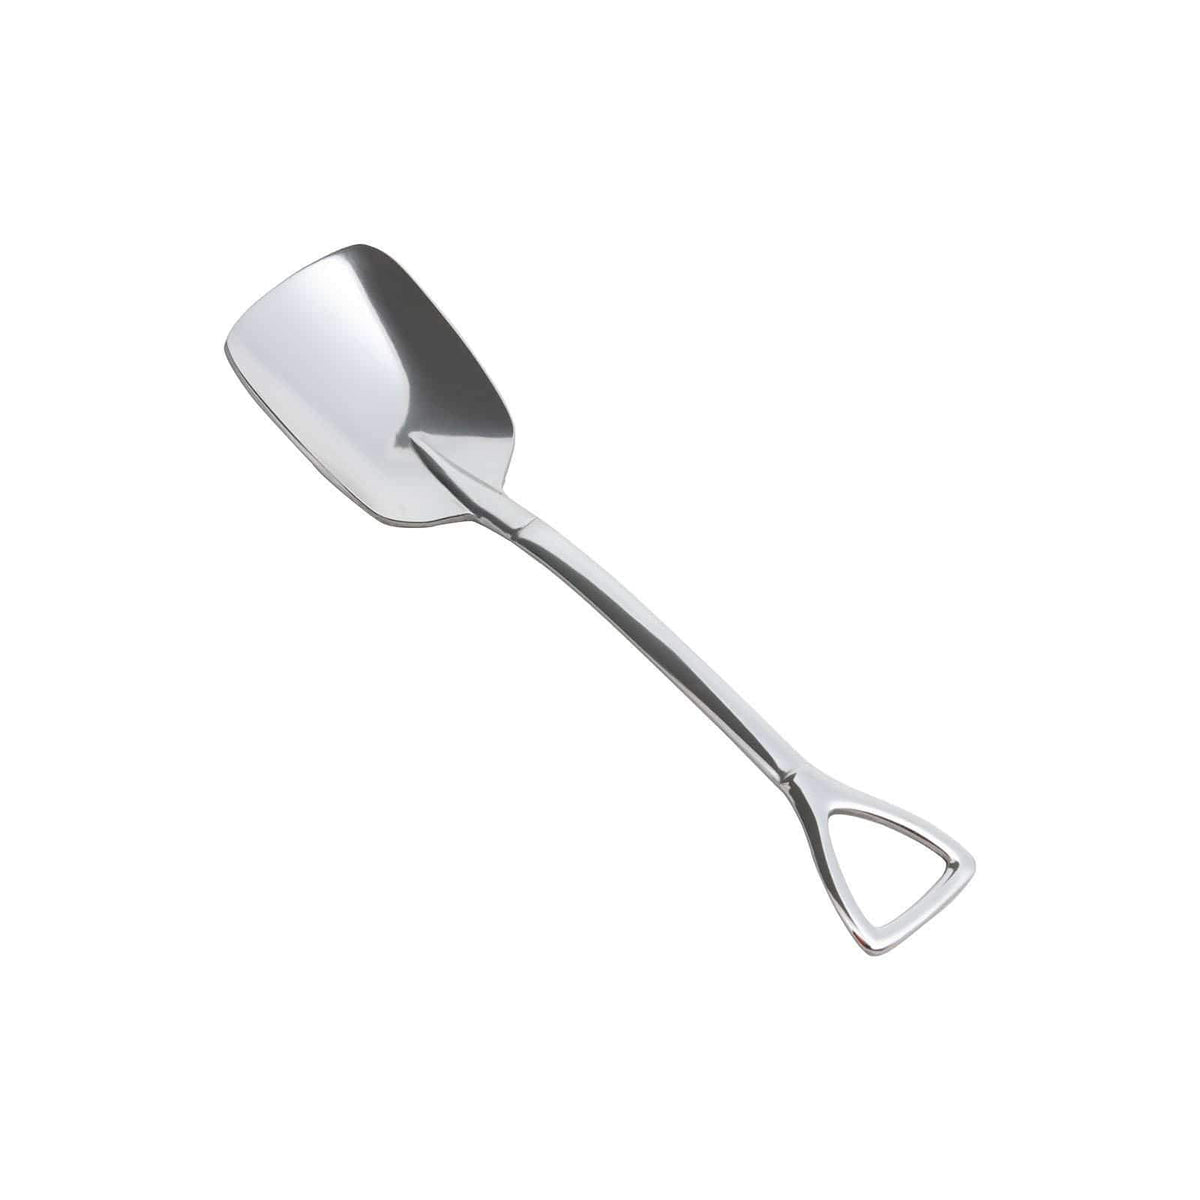 https://www.globalkitchenjapan.com/cdn/shop/products/takeda-garden-shovel-shaped-stainless-steel-ice-cream-spoon-11-5cm-square-head-mirror-finish-loose-cutlery-7416726880339_1200x.jpg?v=1564009978